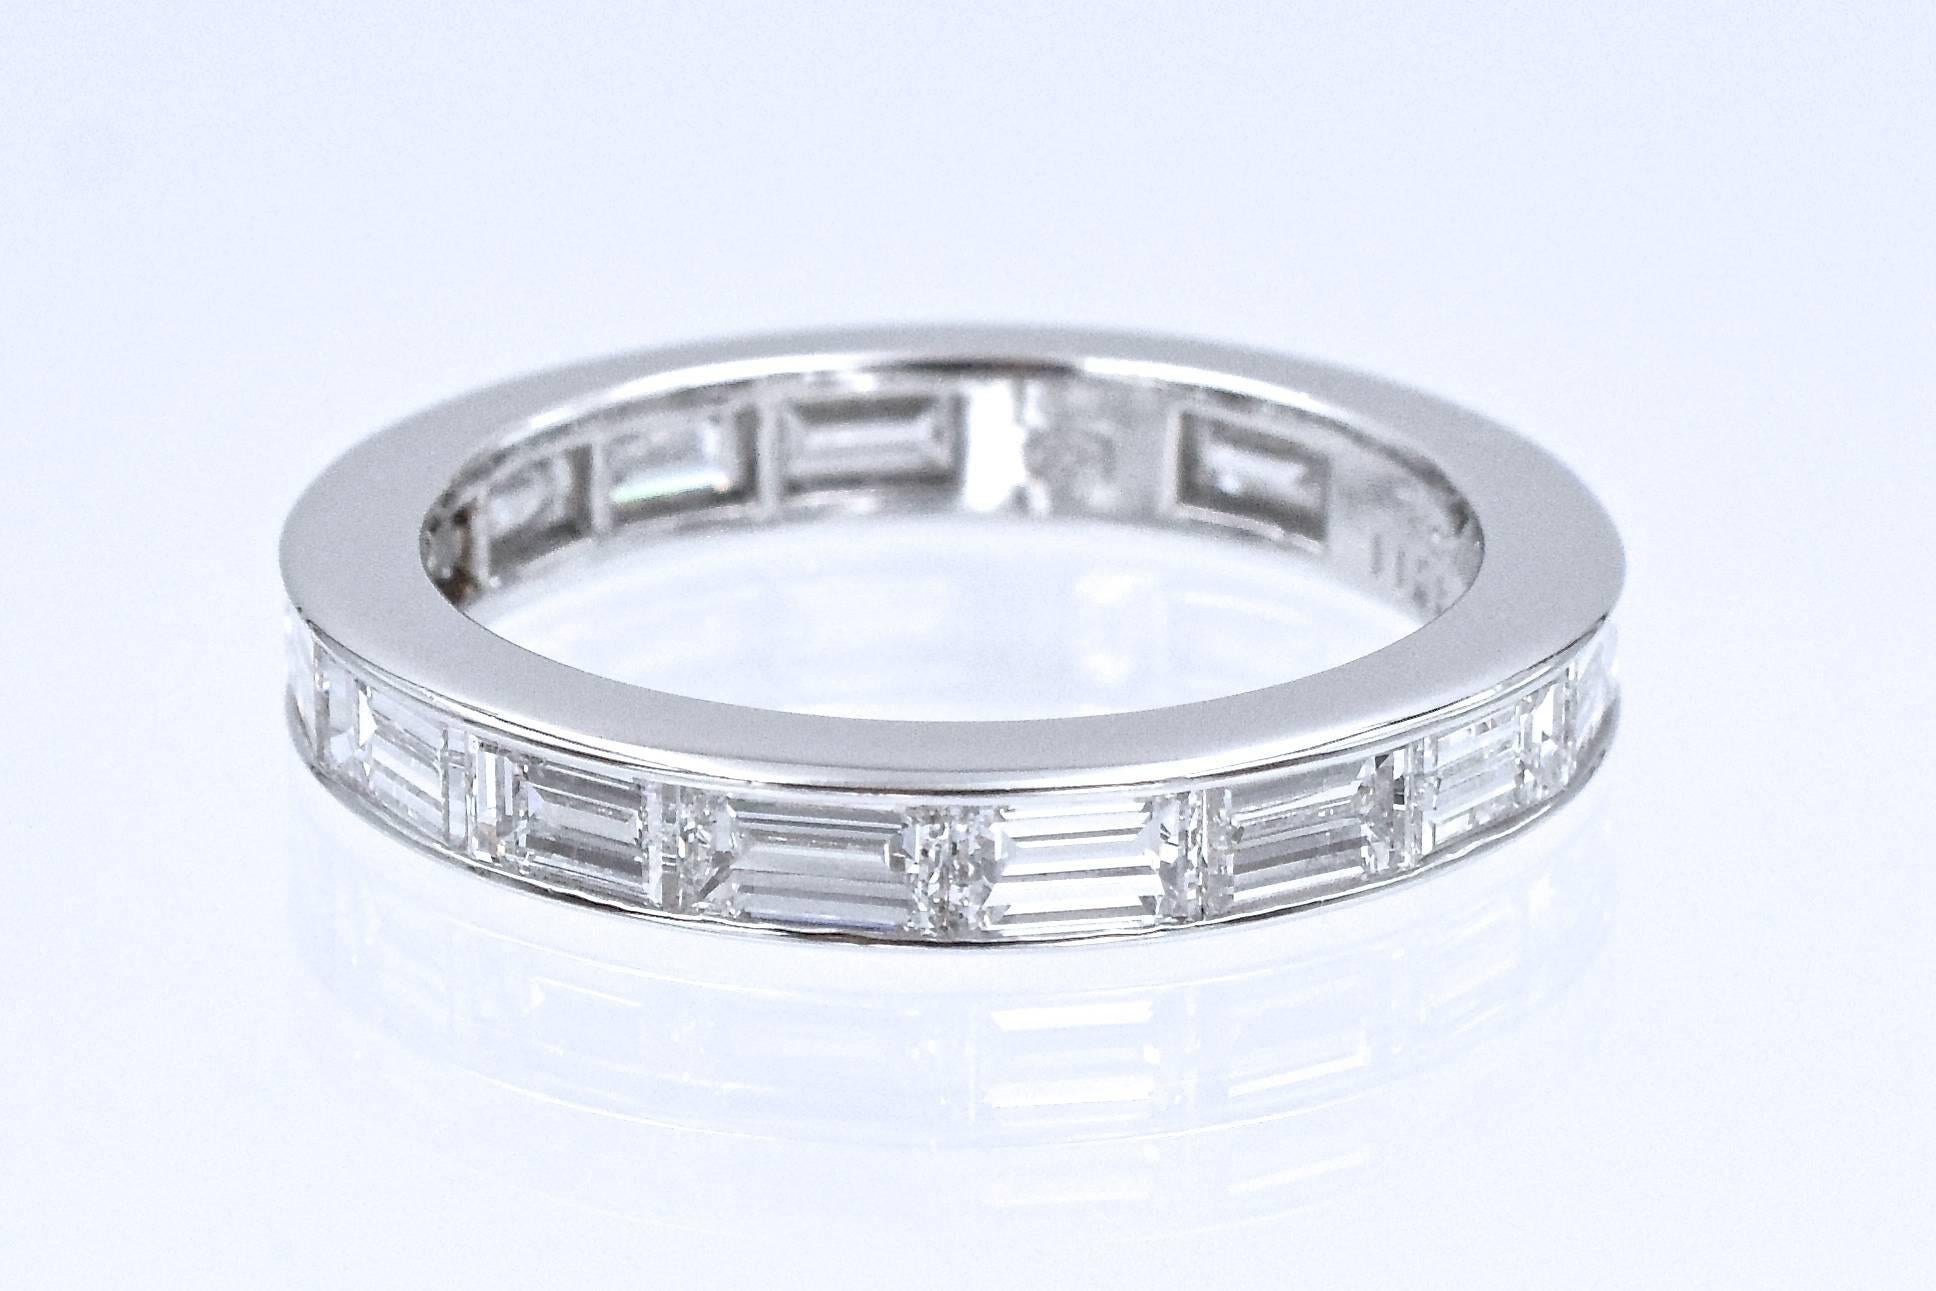 Elegant & Timeless diamond eternity band by Harry Winston. This band has 16 emerald cut diamonds set in platinum with channel style Total weight of the diamonds is 3 carats, F color VS clarity. Signed HW, Stamped PT950, and numbered Ring Size: 7.5